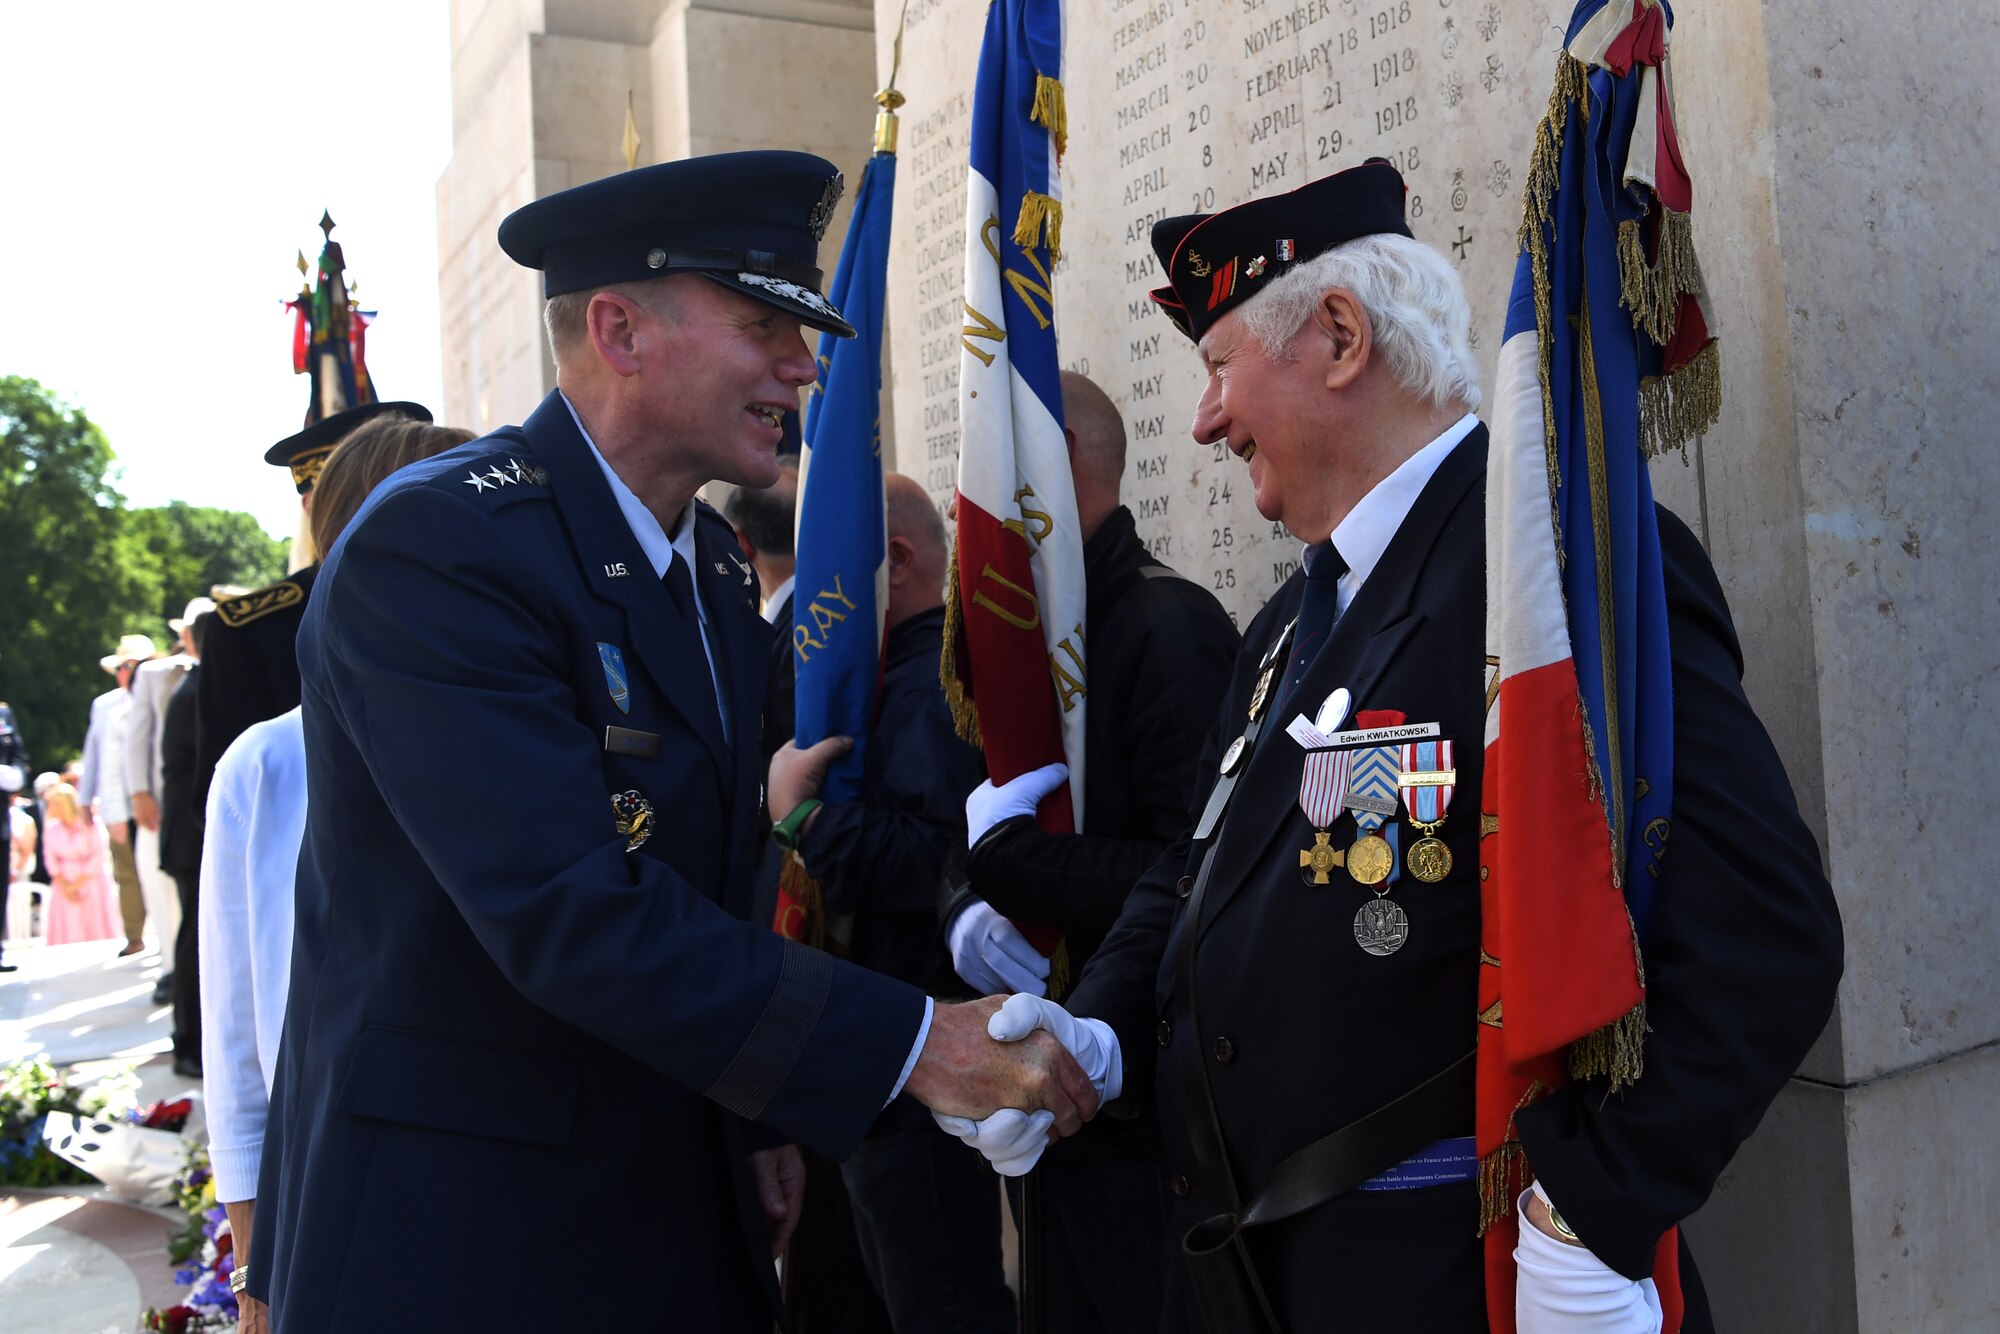 Gen. Wolters shakes hands with a flag bearer at Lafayette Escadrille Memorial.